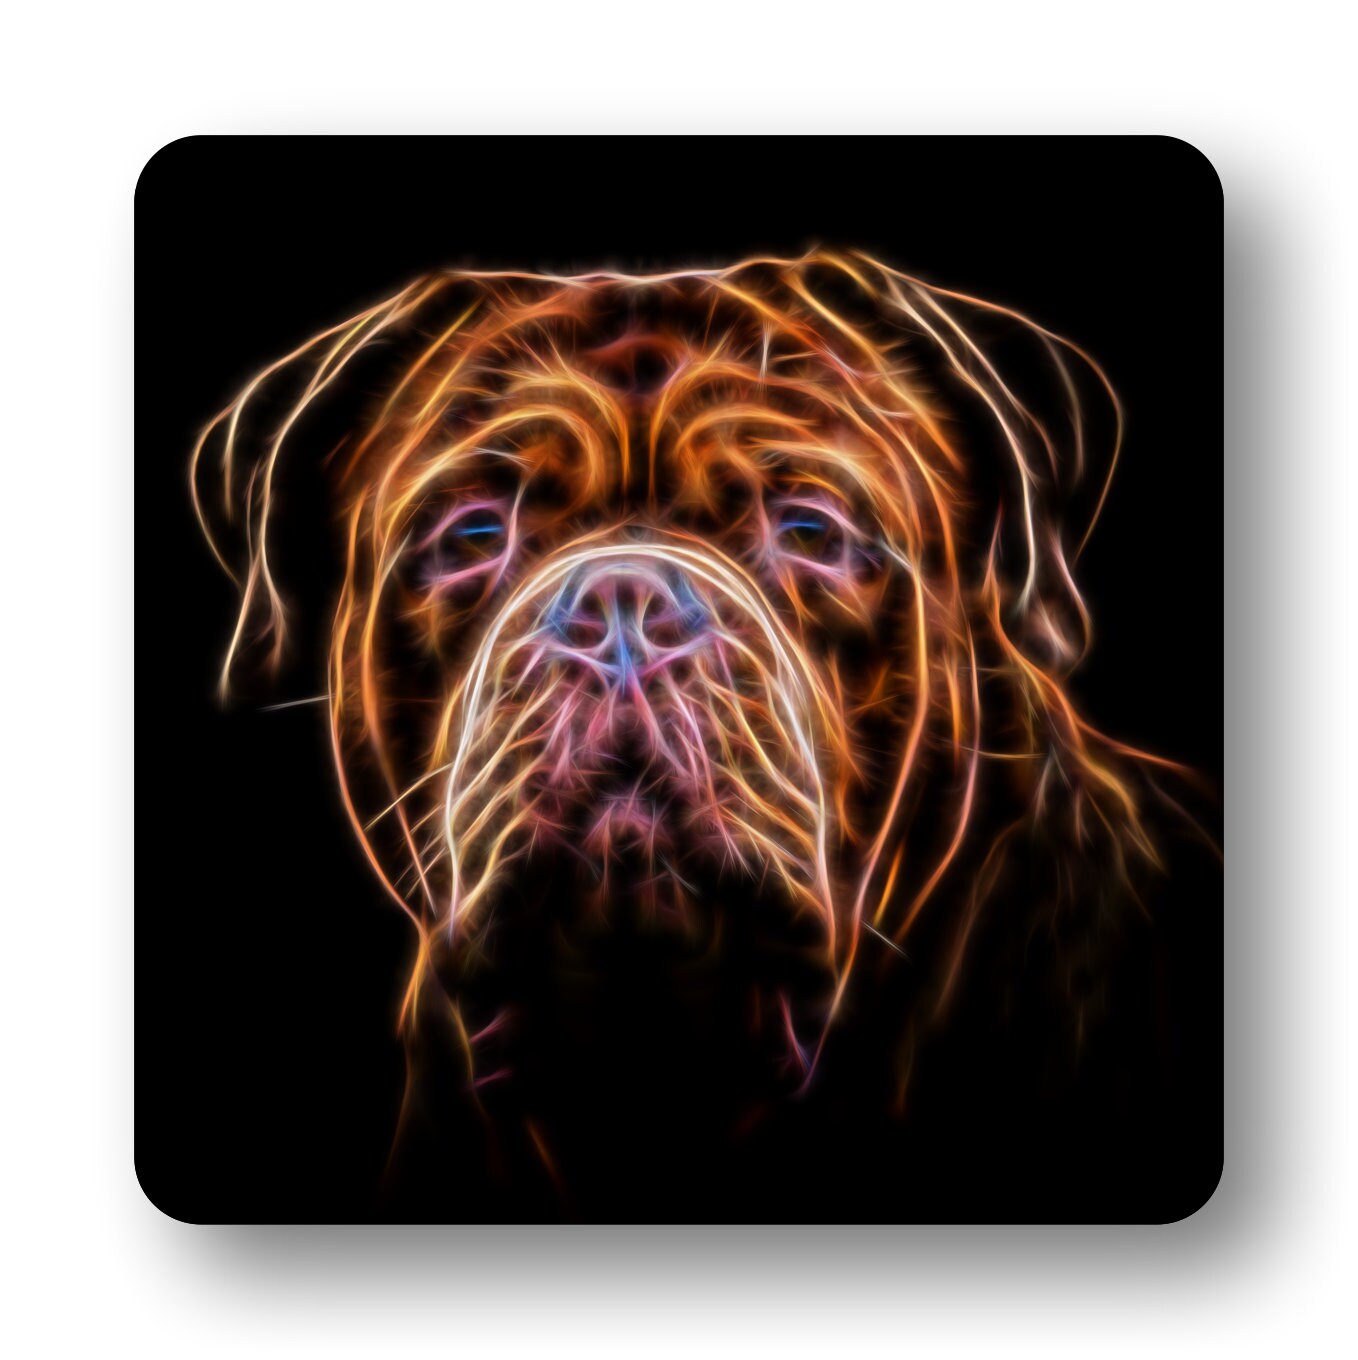 Dogue De Bordeaux Metal Wall Plaque with Stunning Fractal Art Design #3. Also available as Keychain or Coaster.